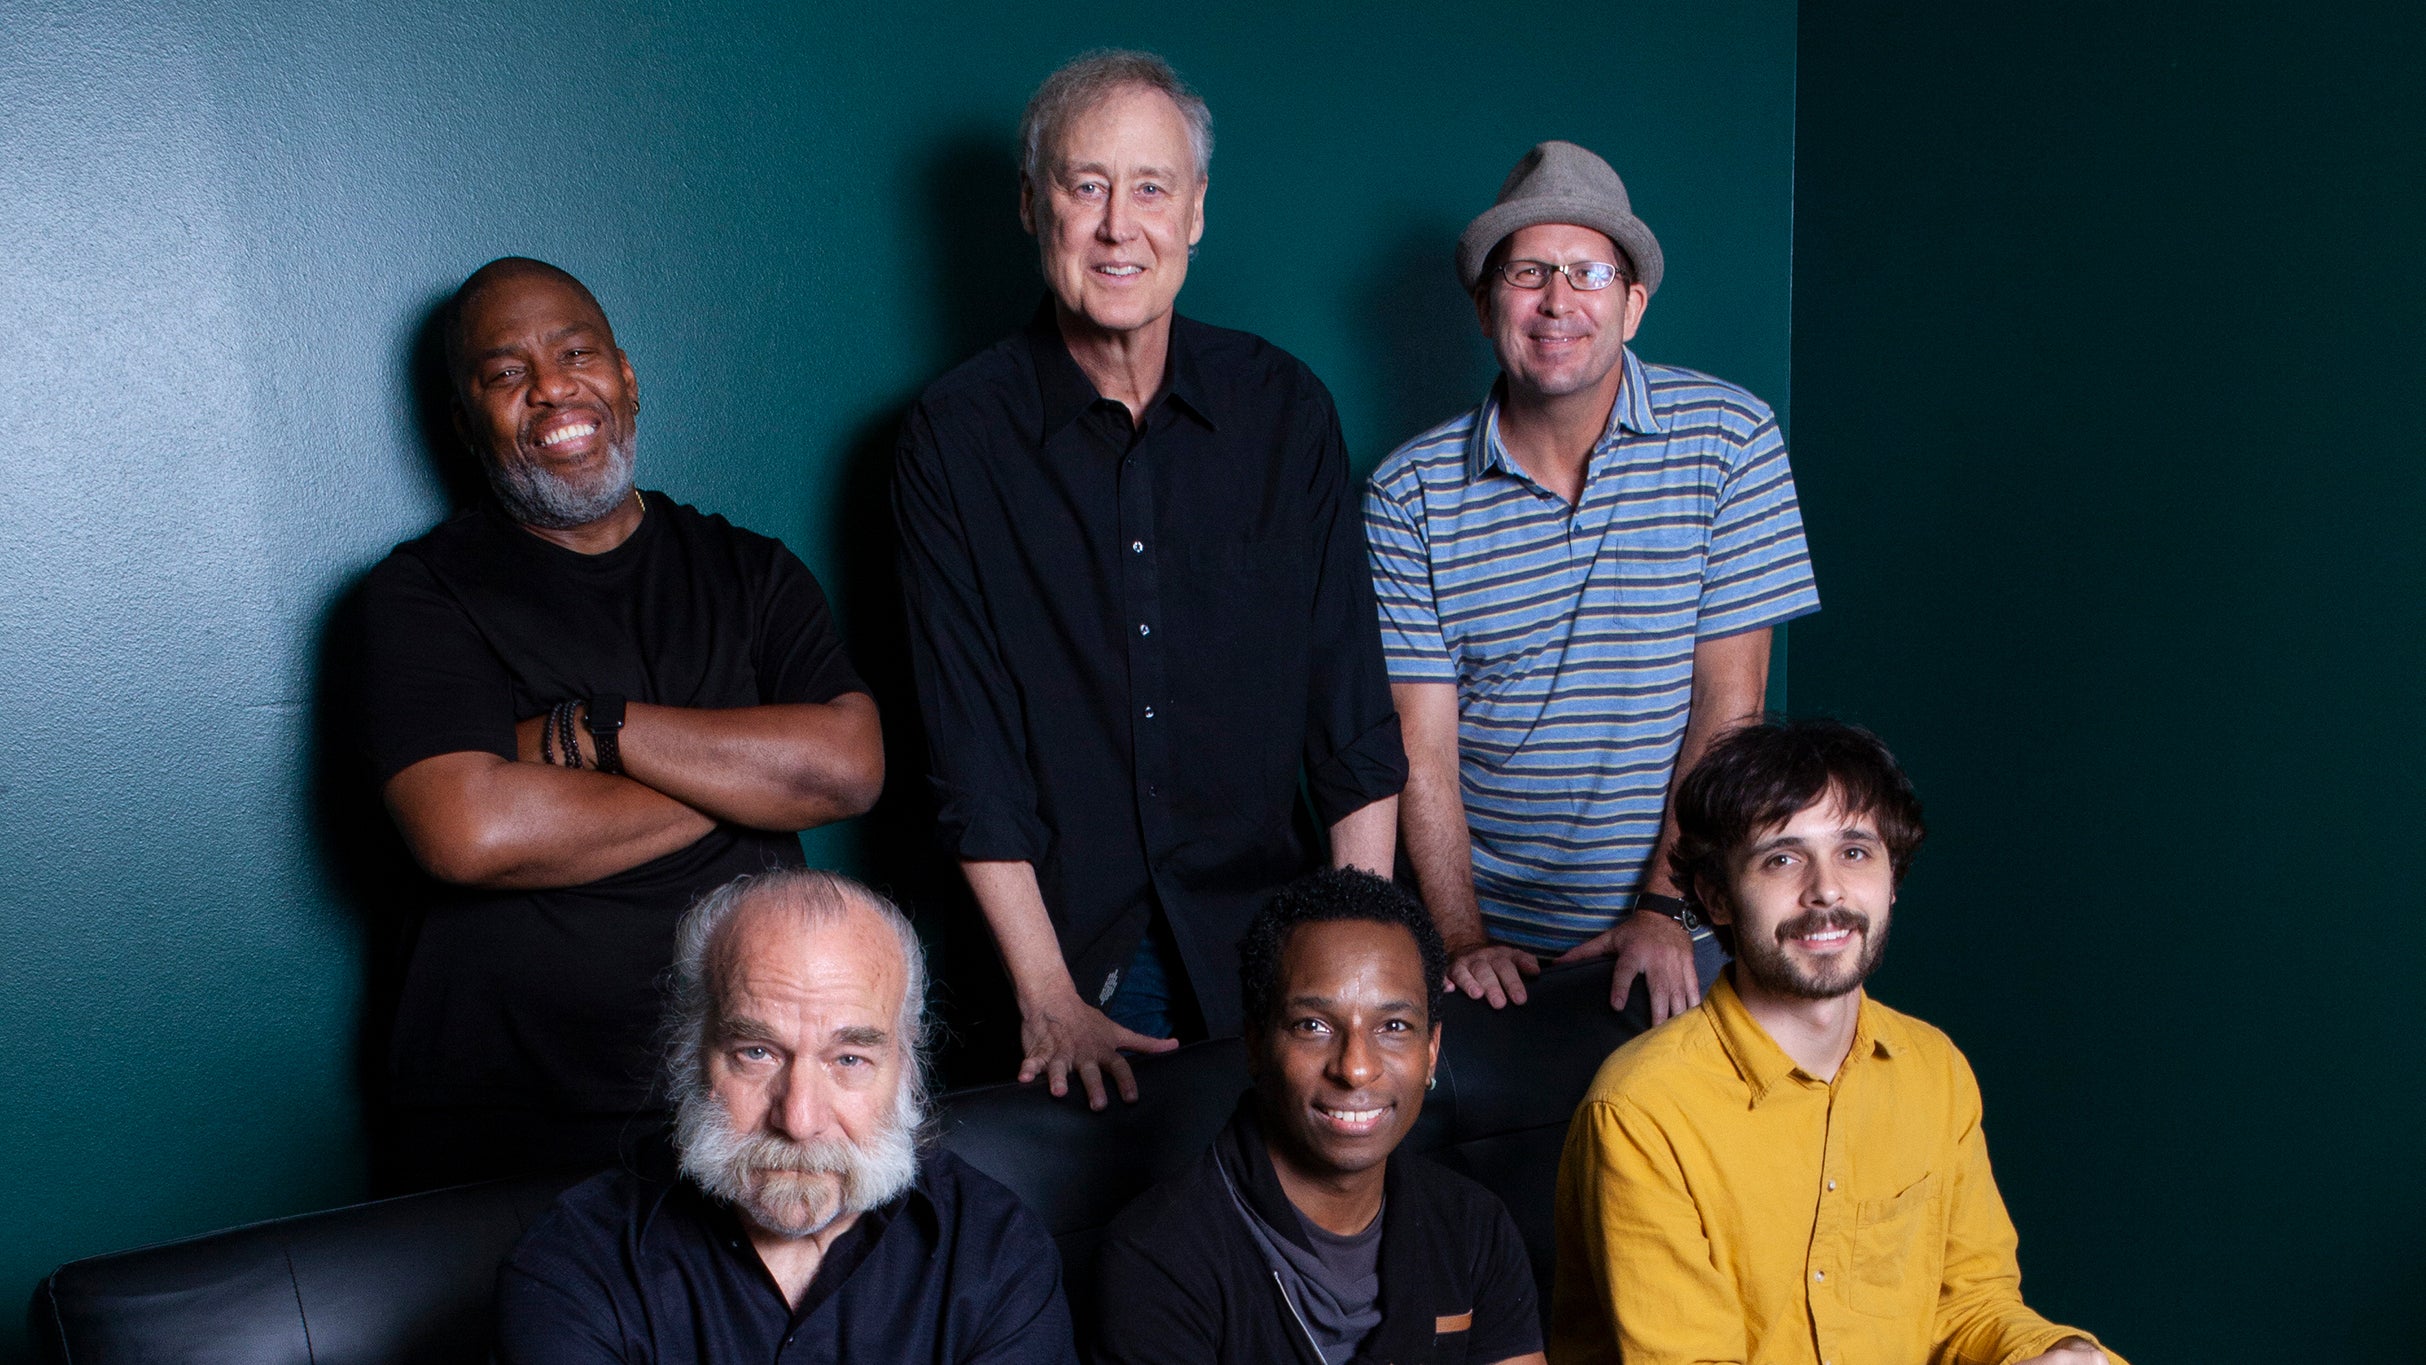 Bruce Hornsby & the Noisemakers - Spirit Trail: 25th Anniversary Tour presale code for performance tickets in Madison, WI (Orpheum Theater)